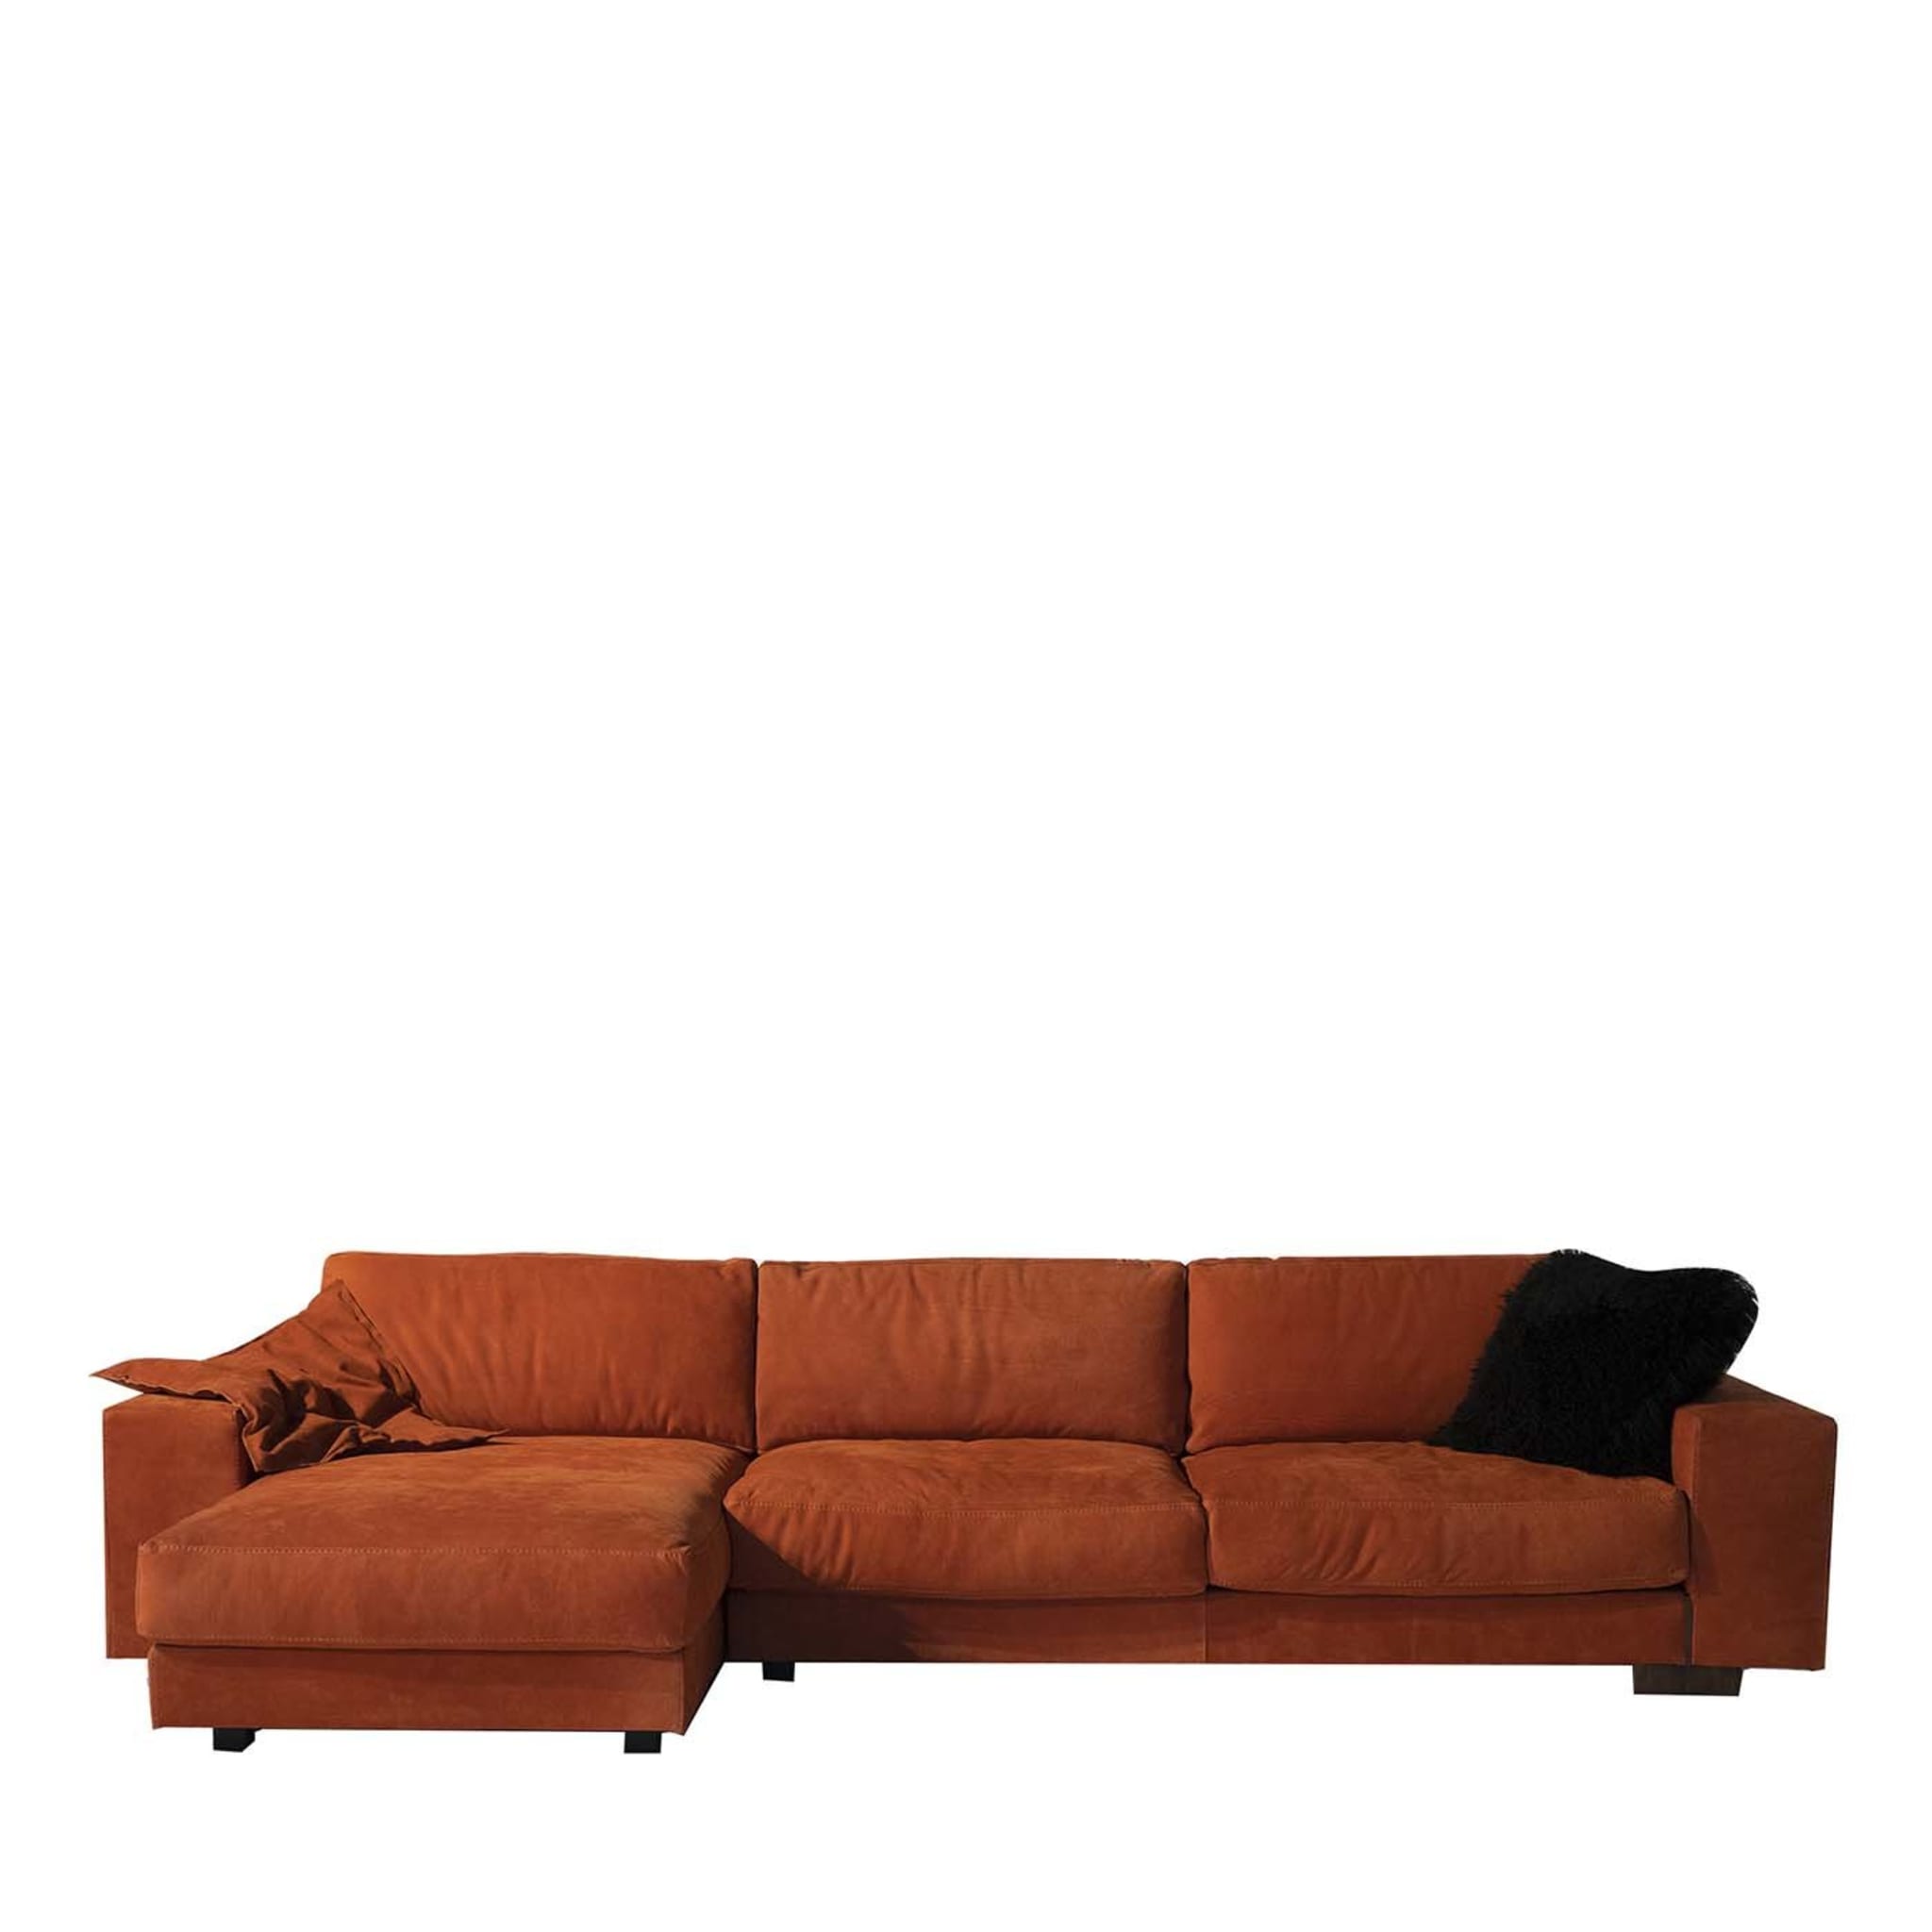 Glam sofa Tribeca Collection by Marco and Giulio Mantellassi - Main view